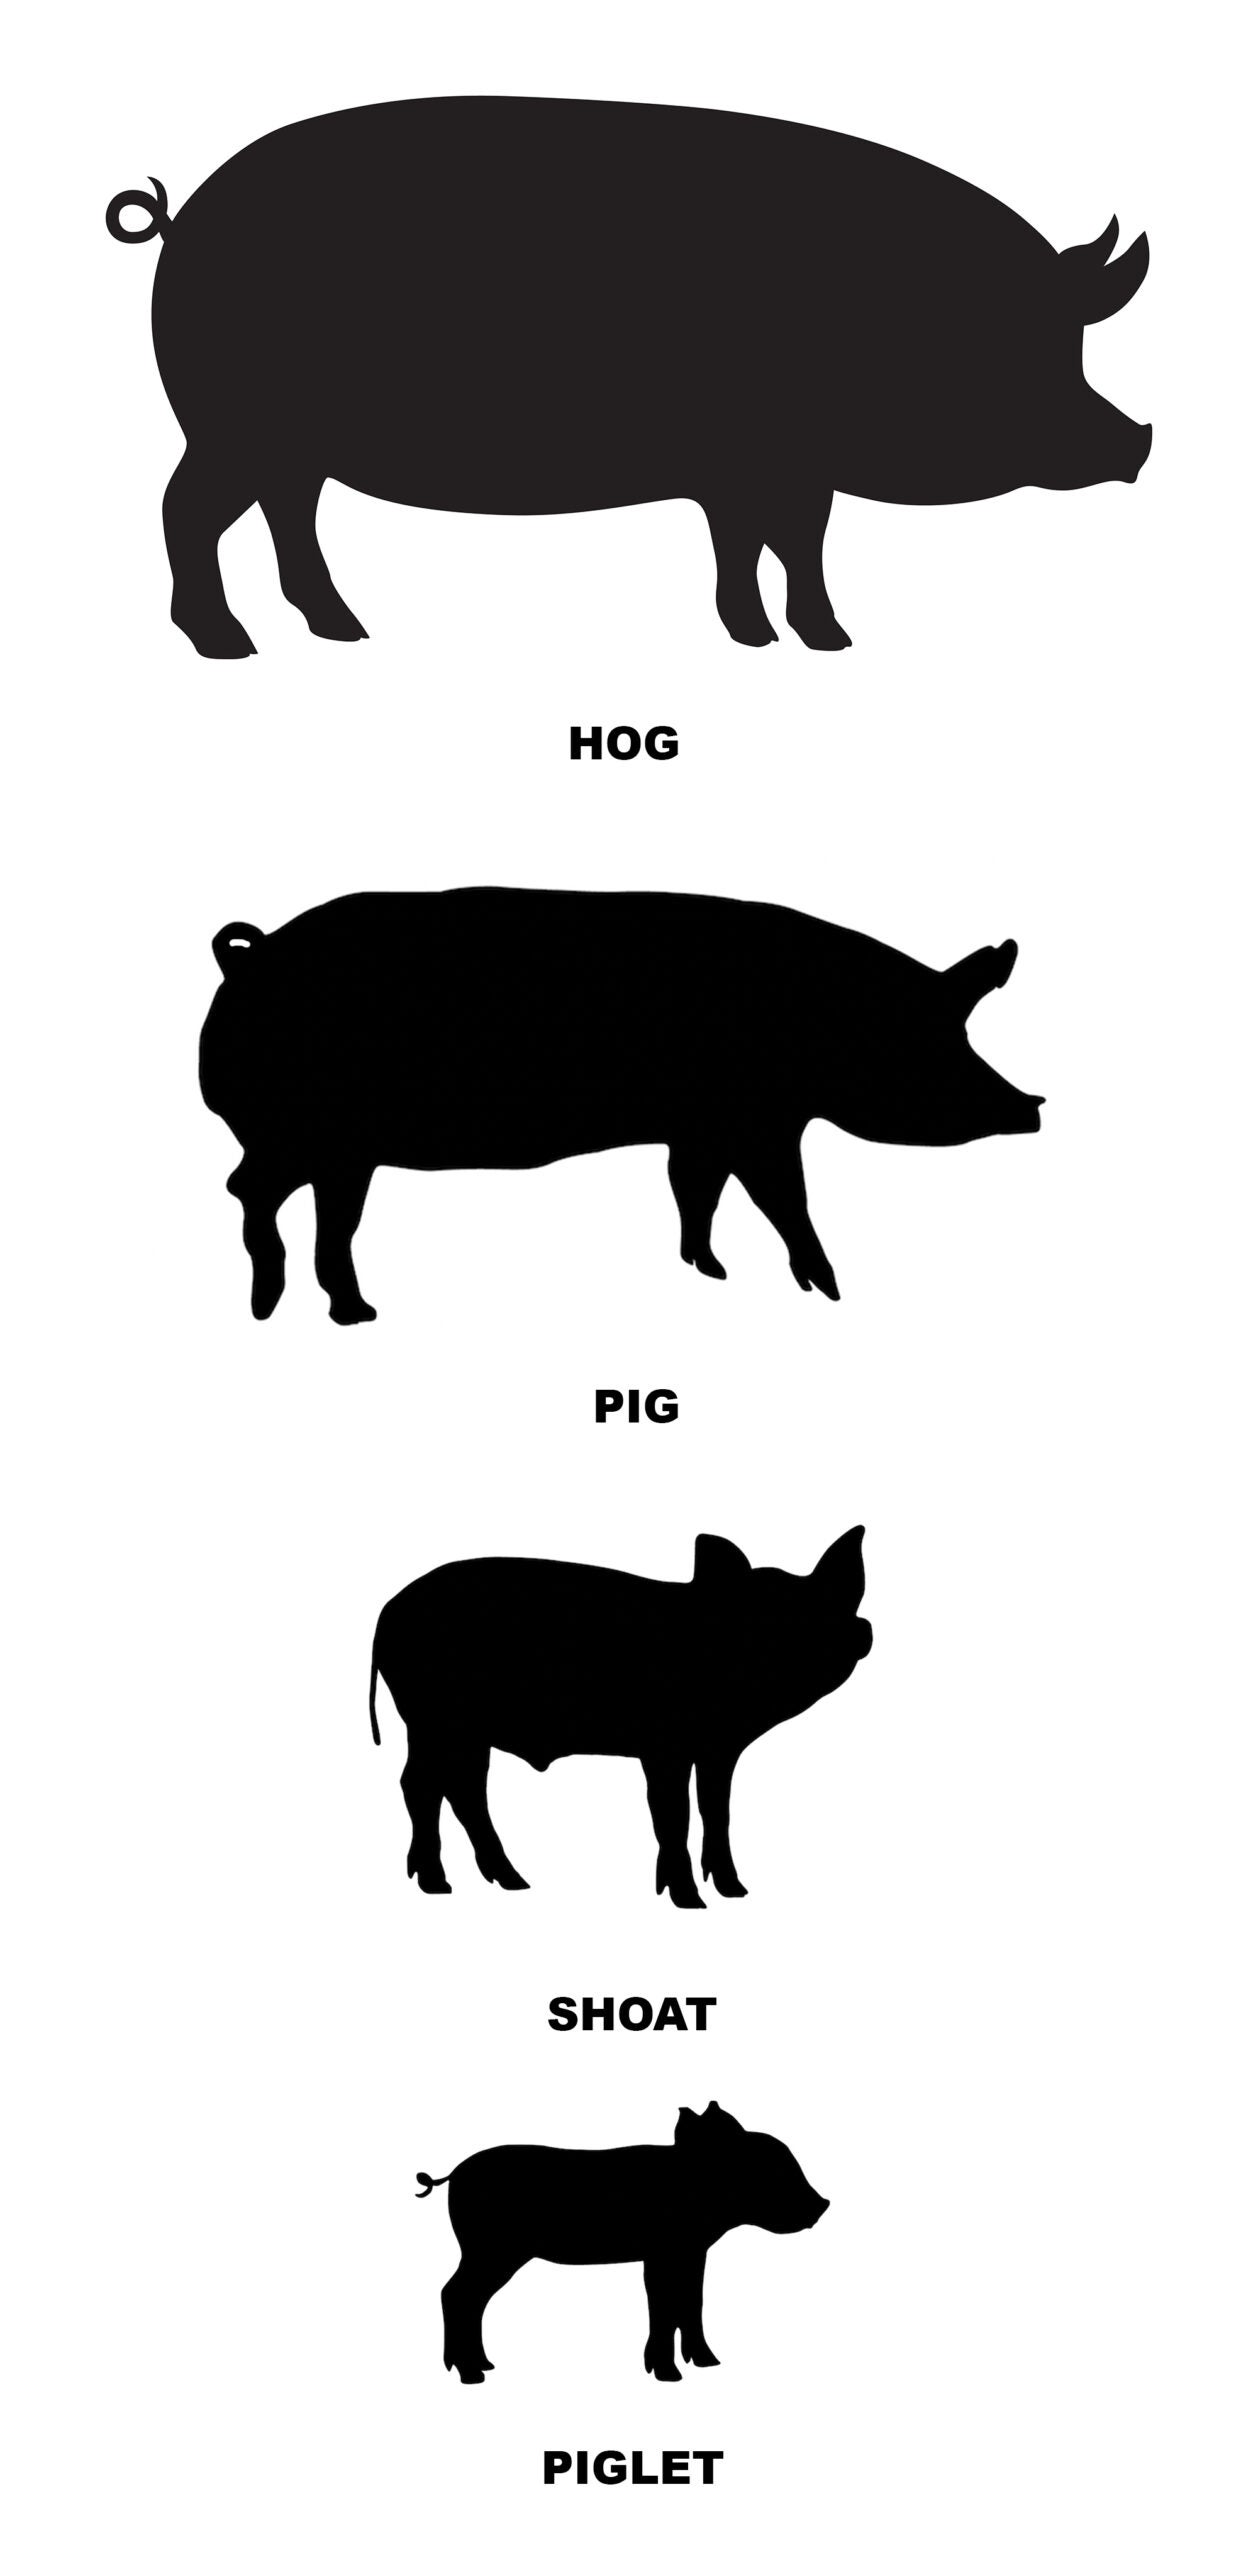 pigs vs hogs comes down to size; this chart shows all pig sizes